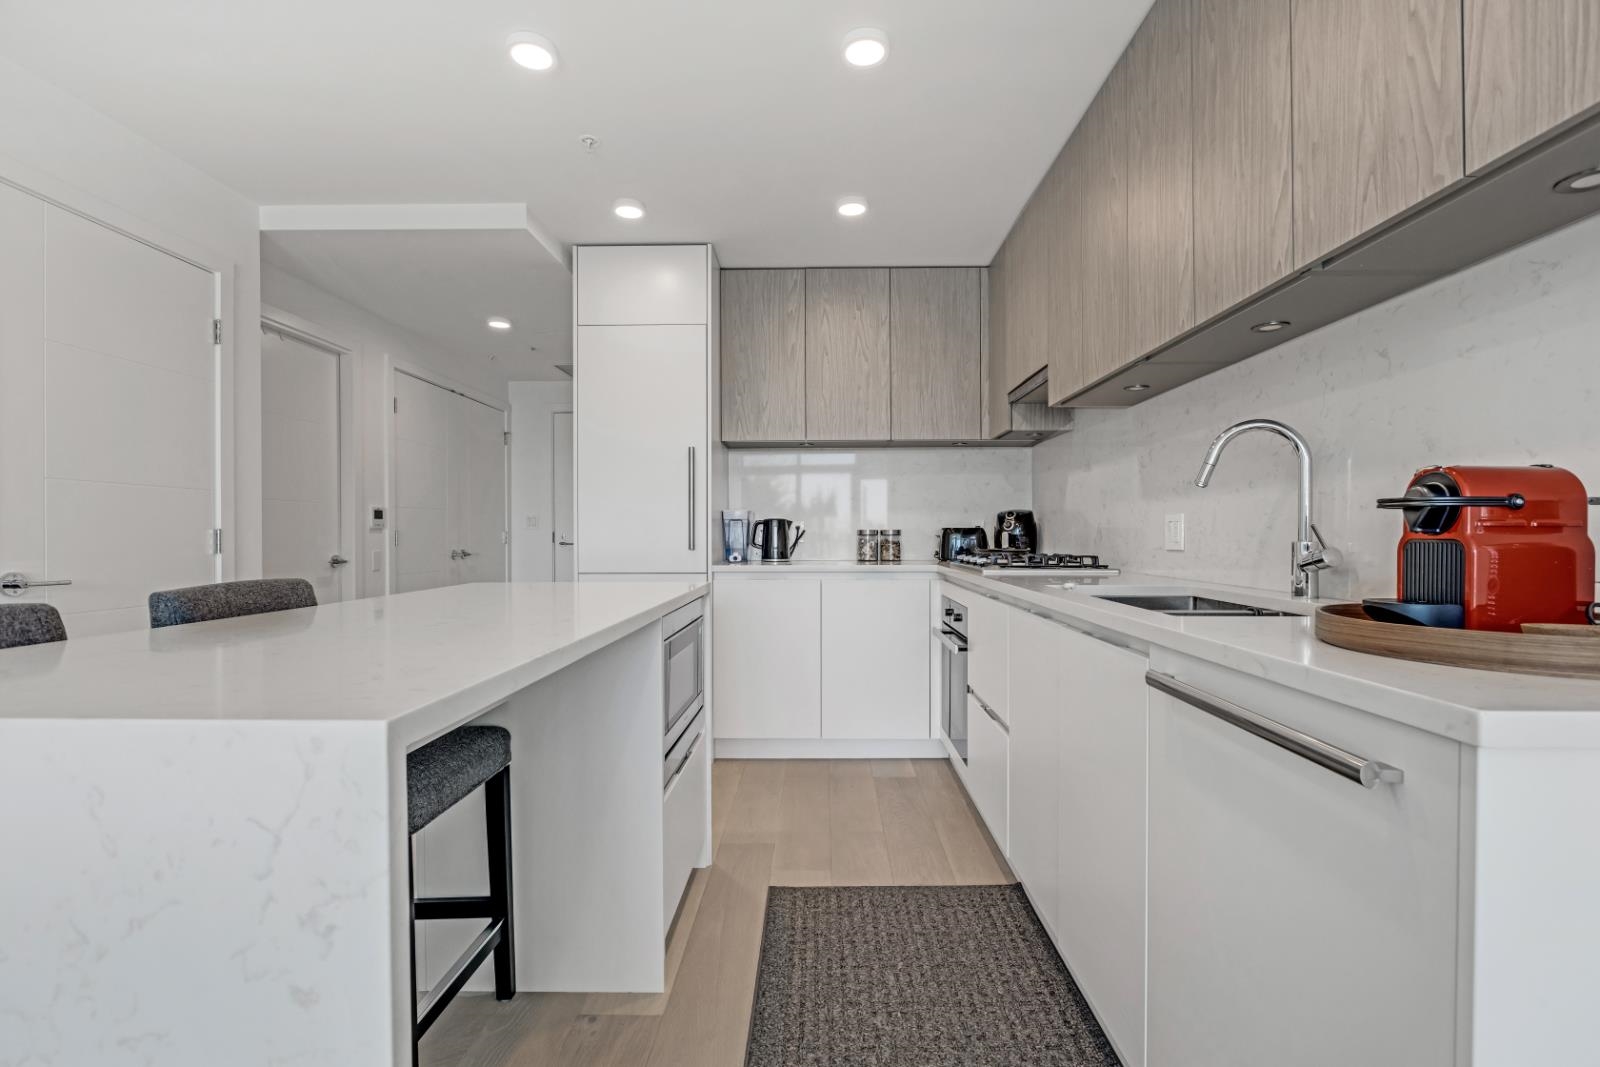 Listing image of 307 4240 CAMBIE STREET